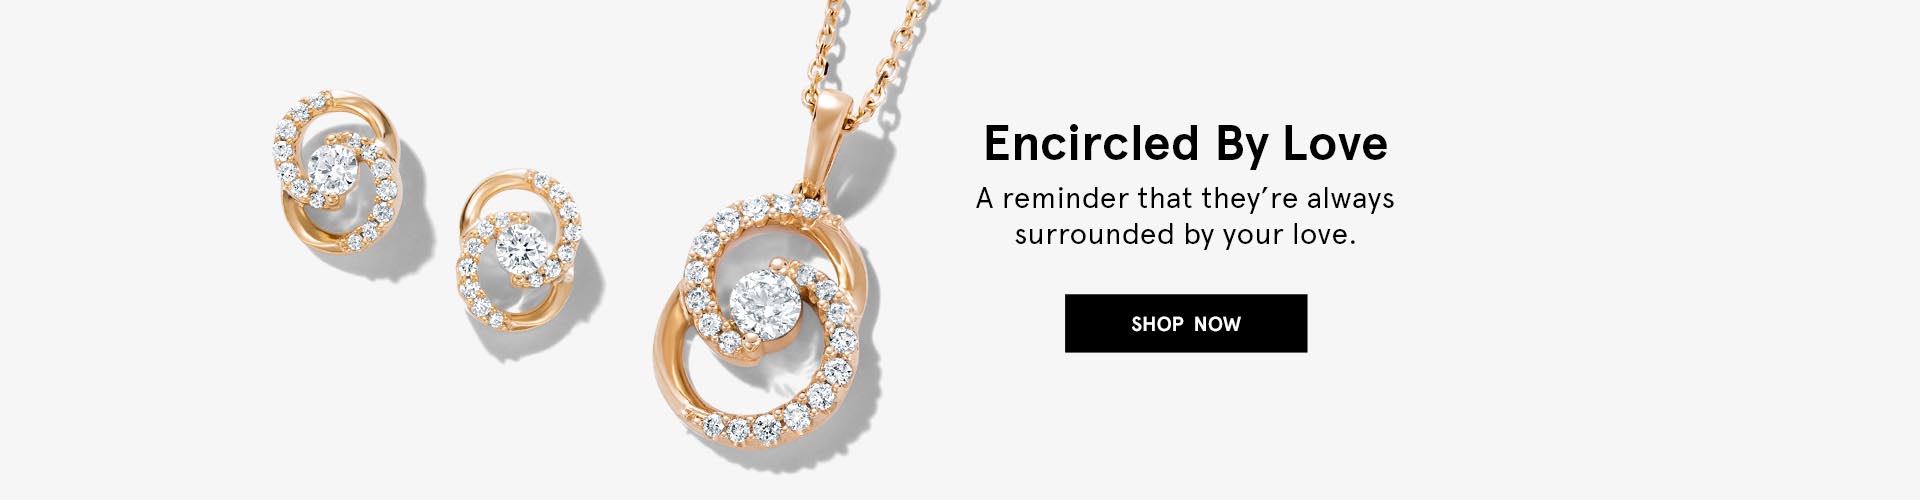 Shop The Encircled by Love Collection